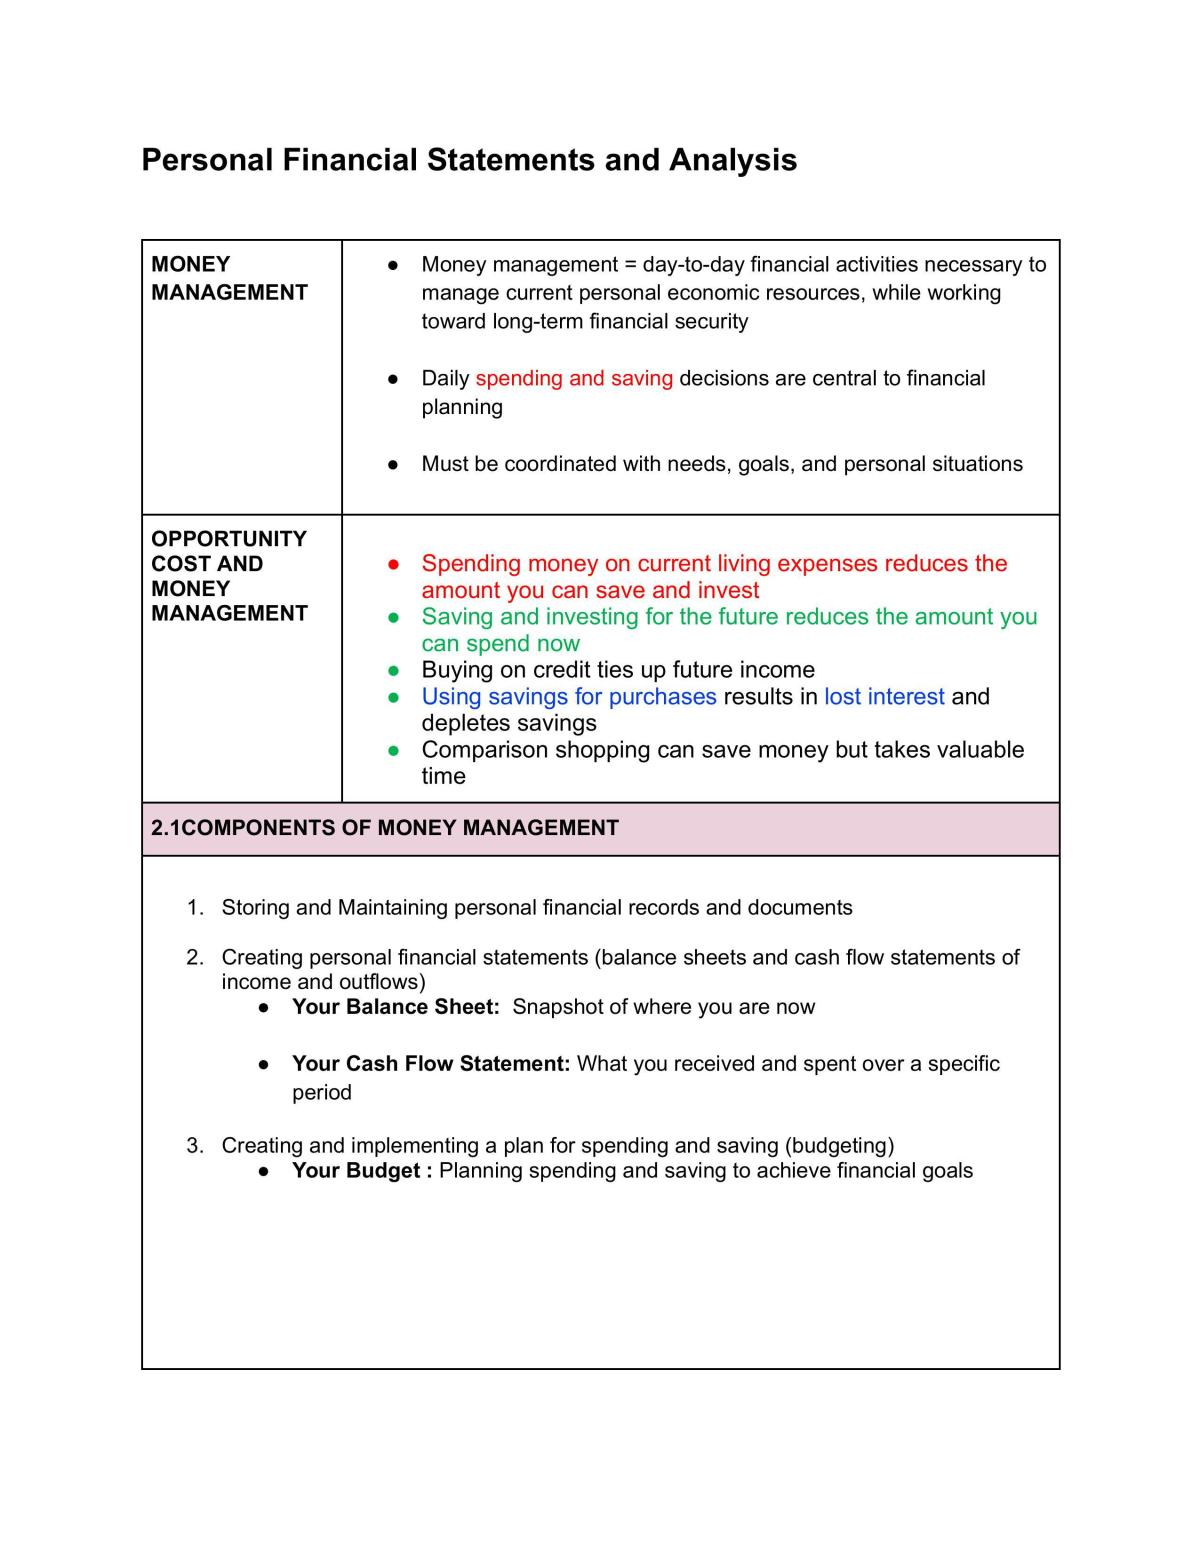 Personal Financial Statements and Analysis - Page 1